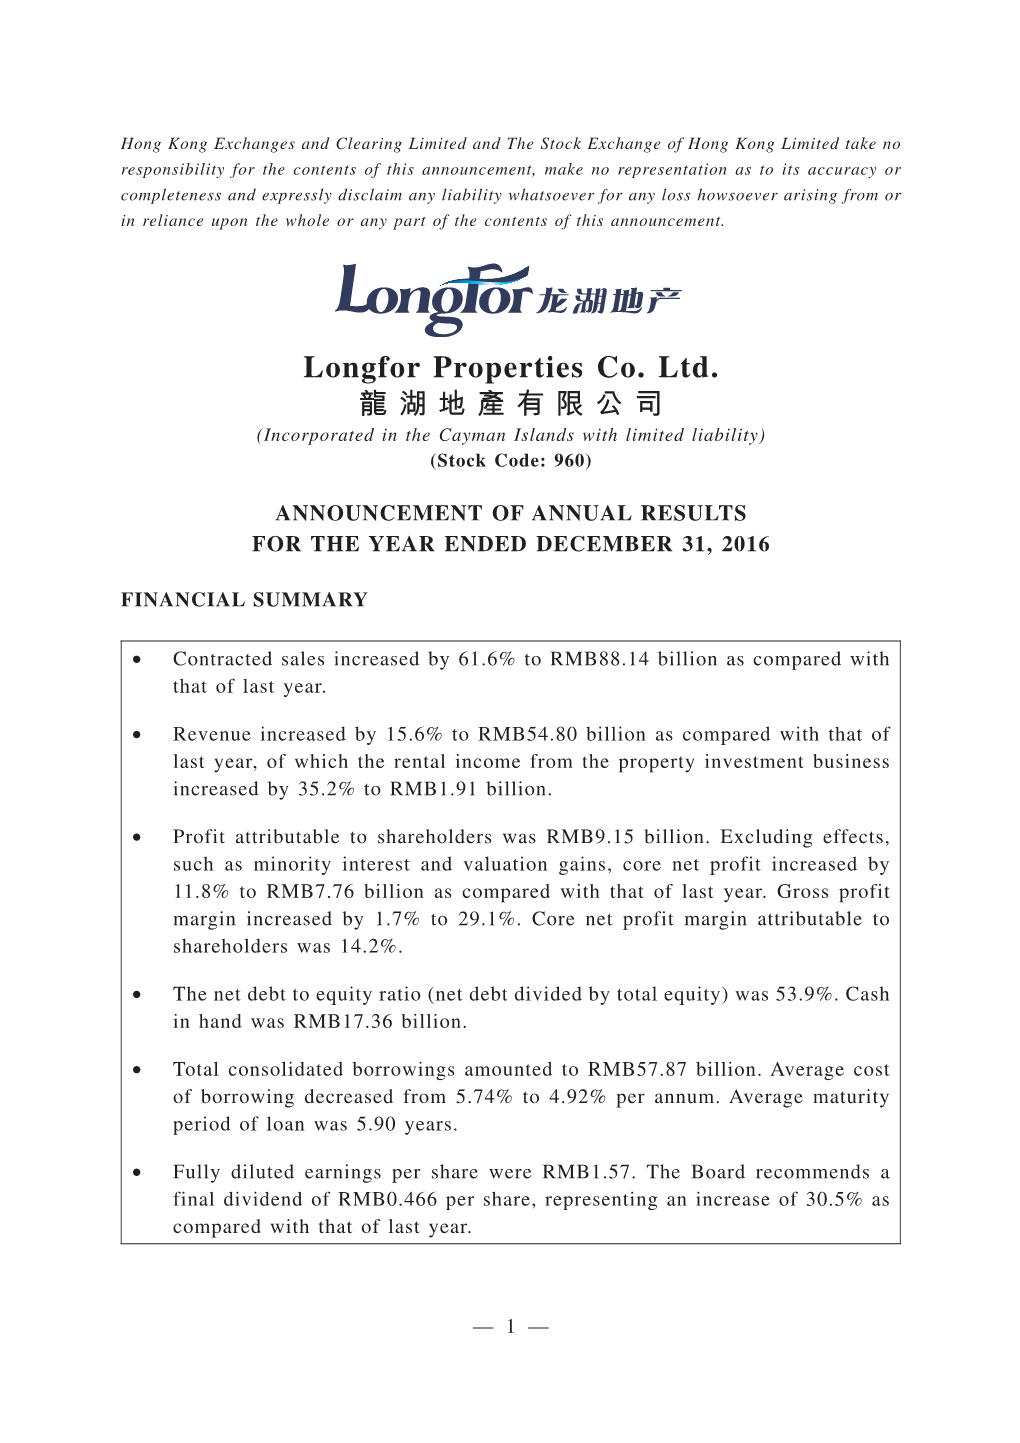 Longfor Properties Co. Ltd. 龍湖地產有限公司 (Incorporated in the Cayman Islands with Limited Liability) (Stock Code: 960)